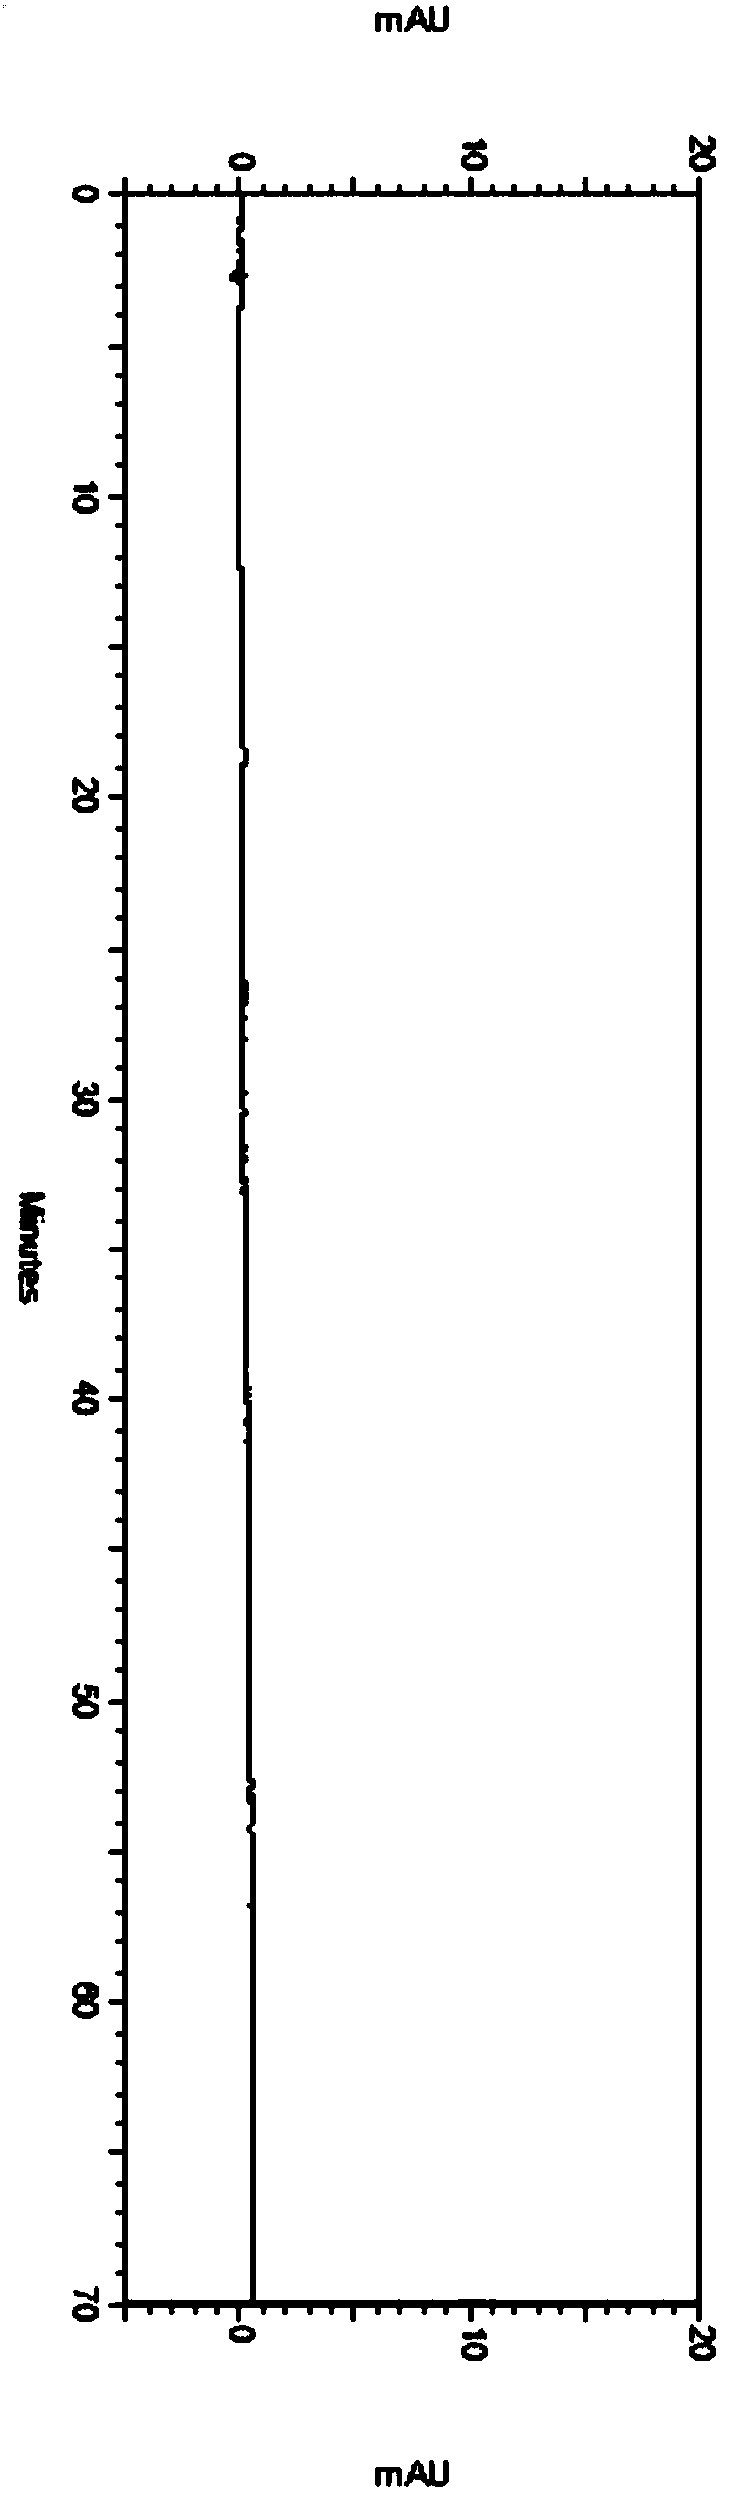 Method for separating and detecting daclatasvir hydrochloride and optical isomers thereof